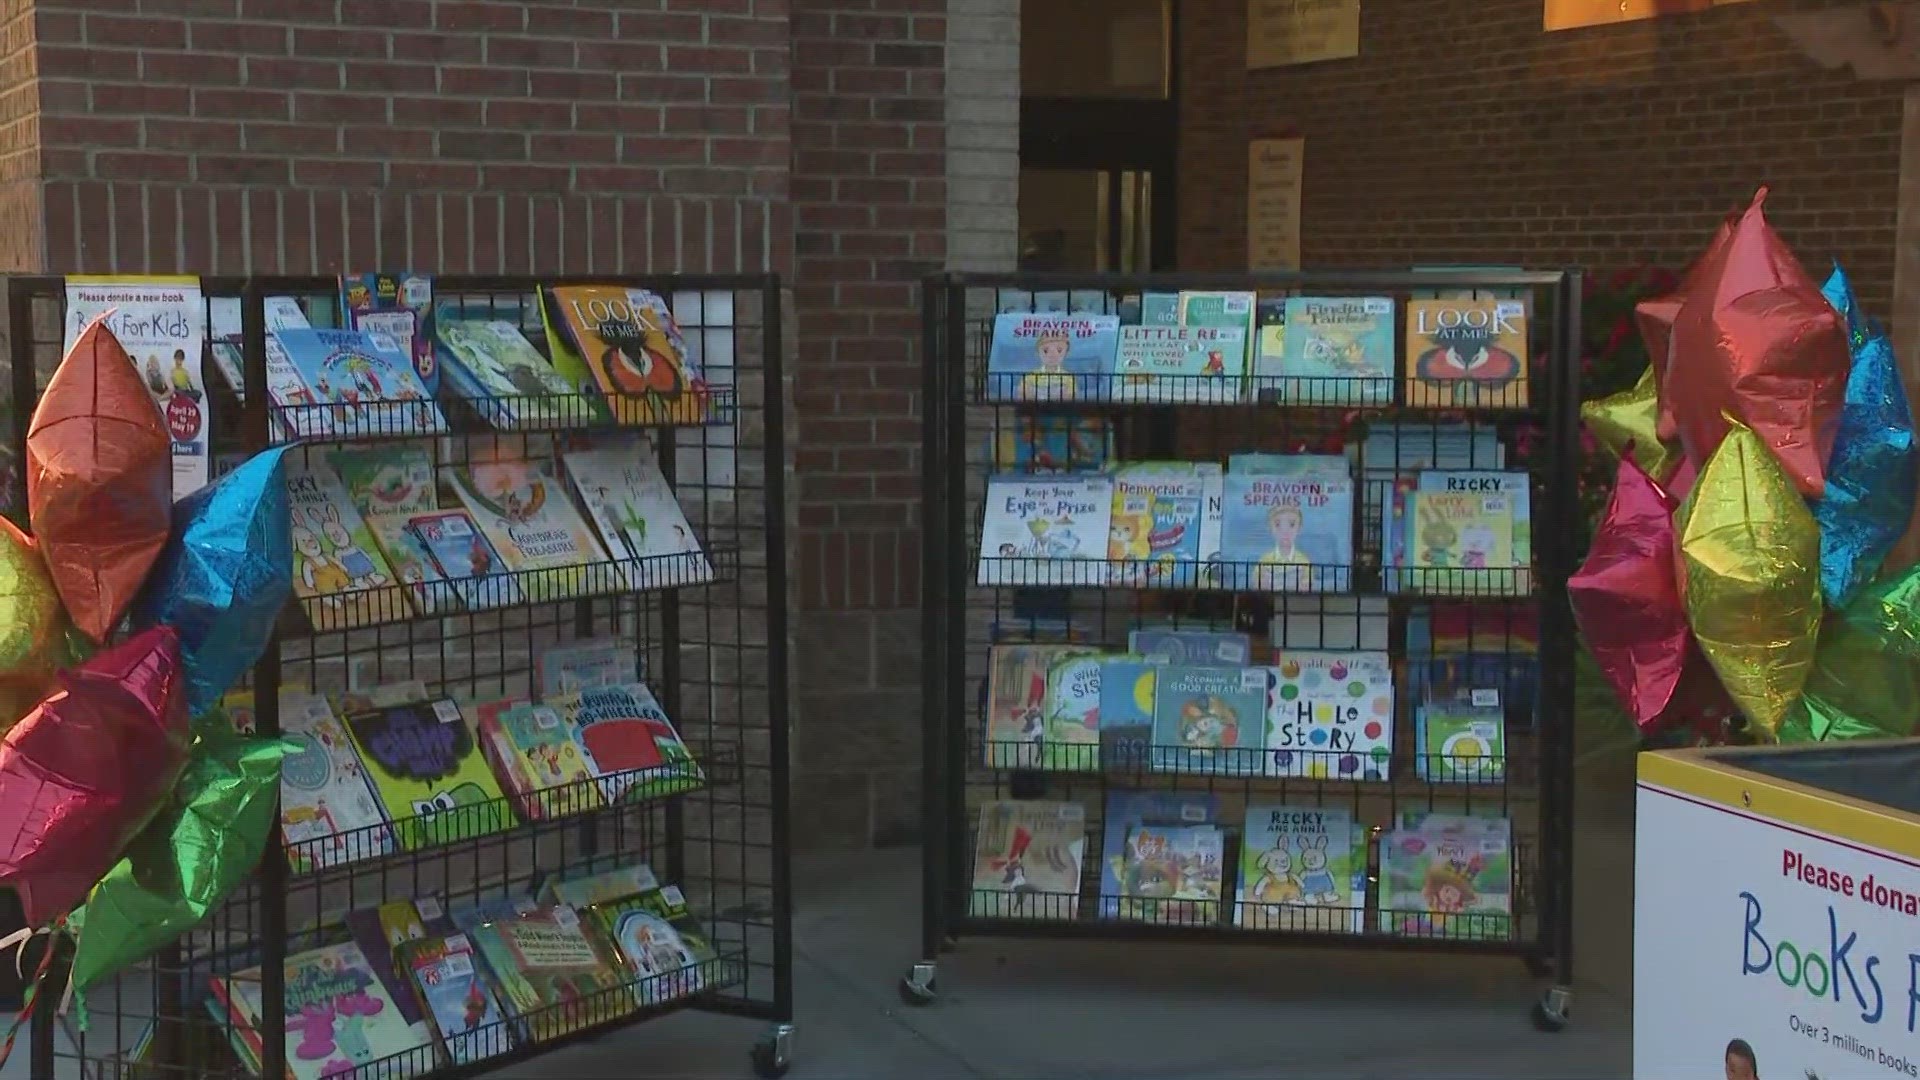 People can drop of books at various locations, including Wegmans.